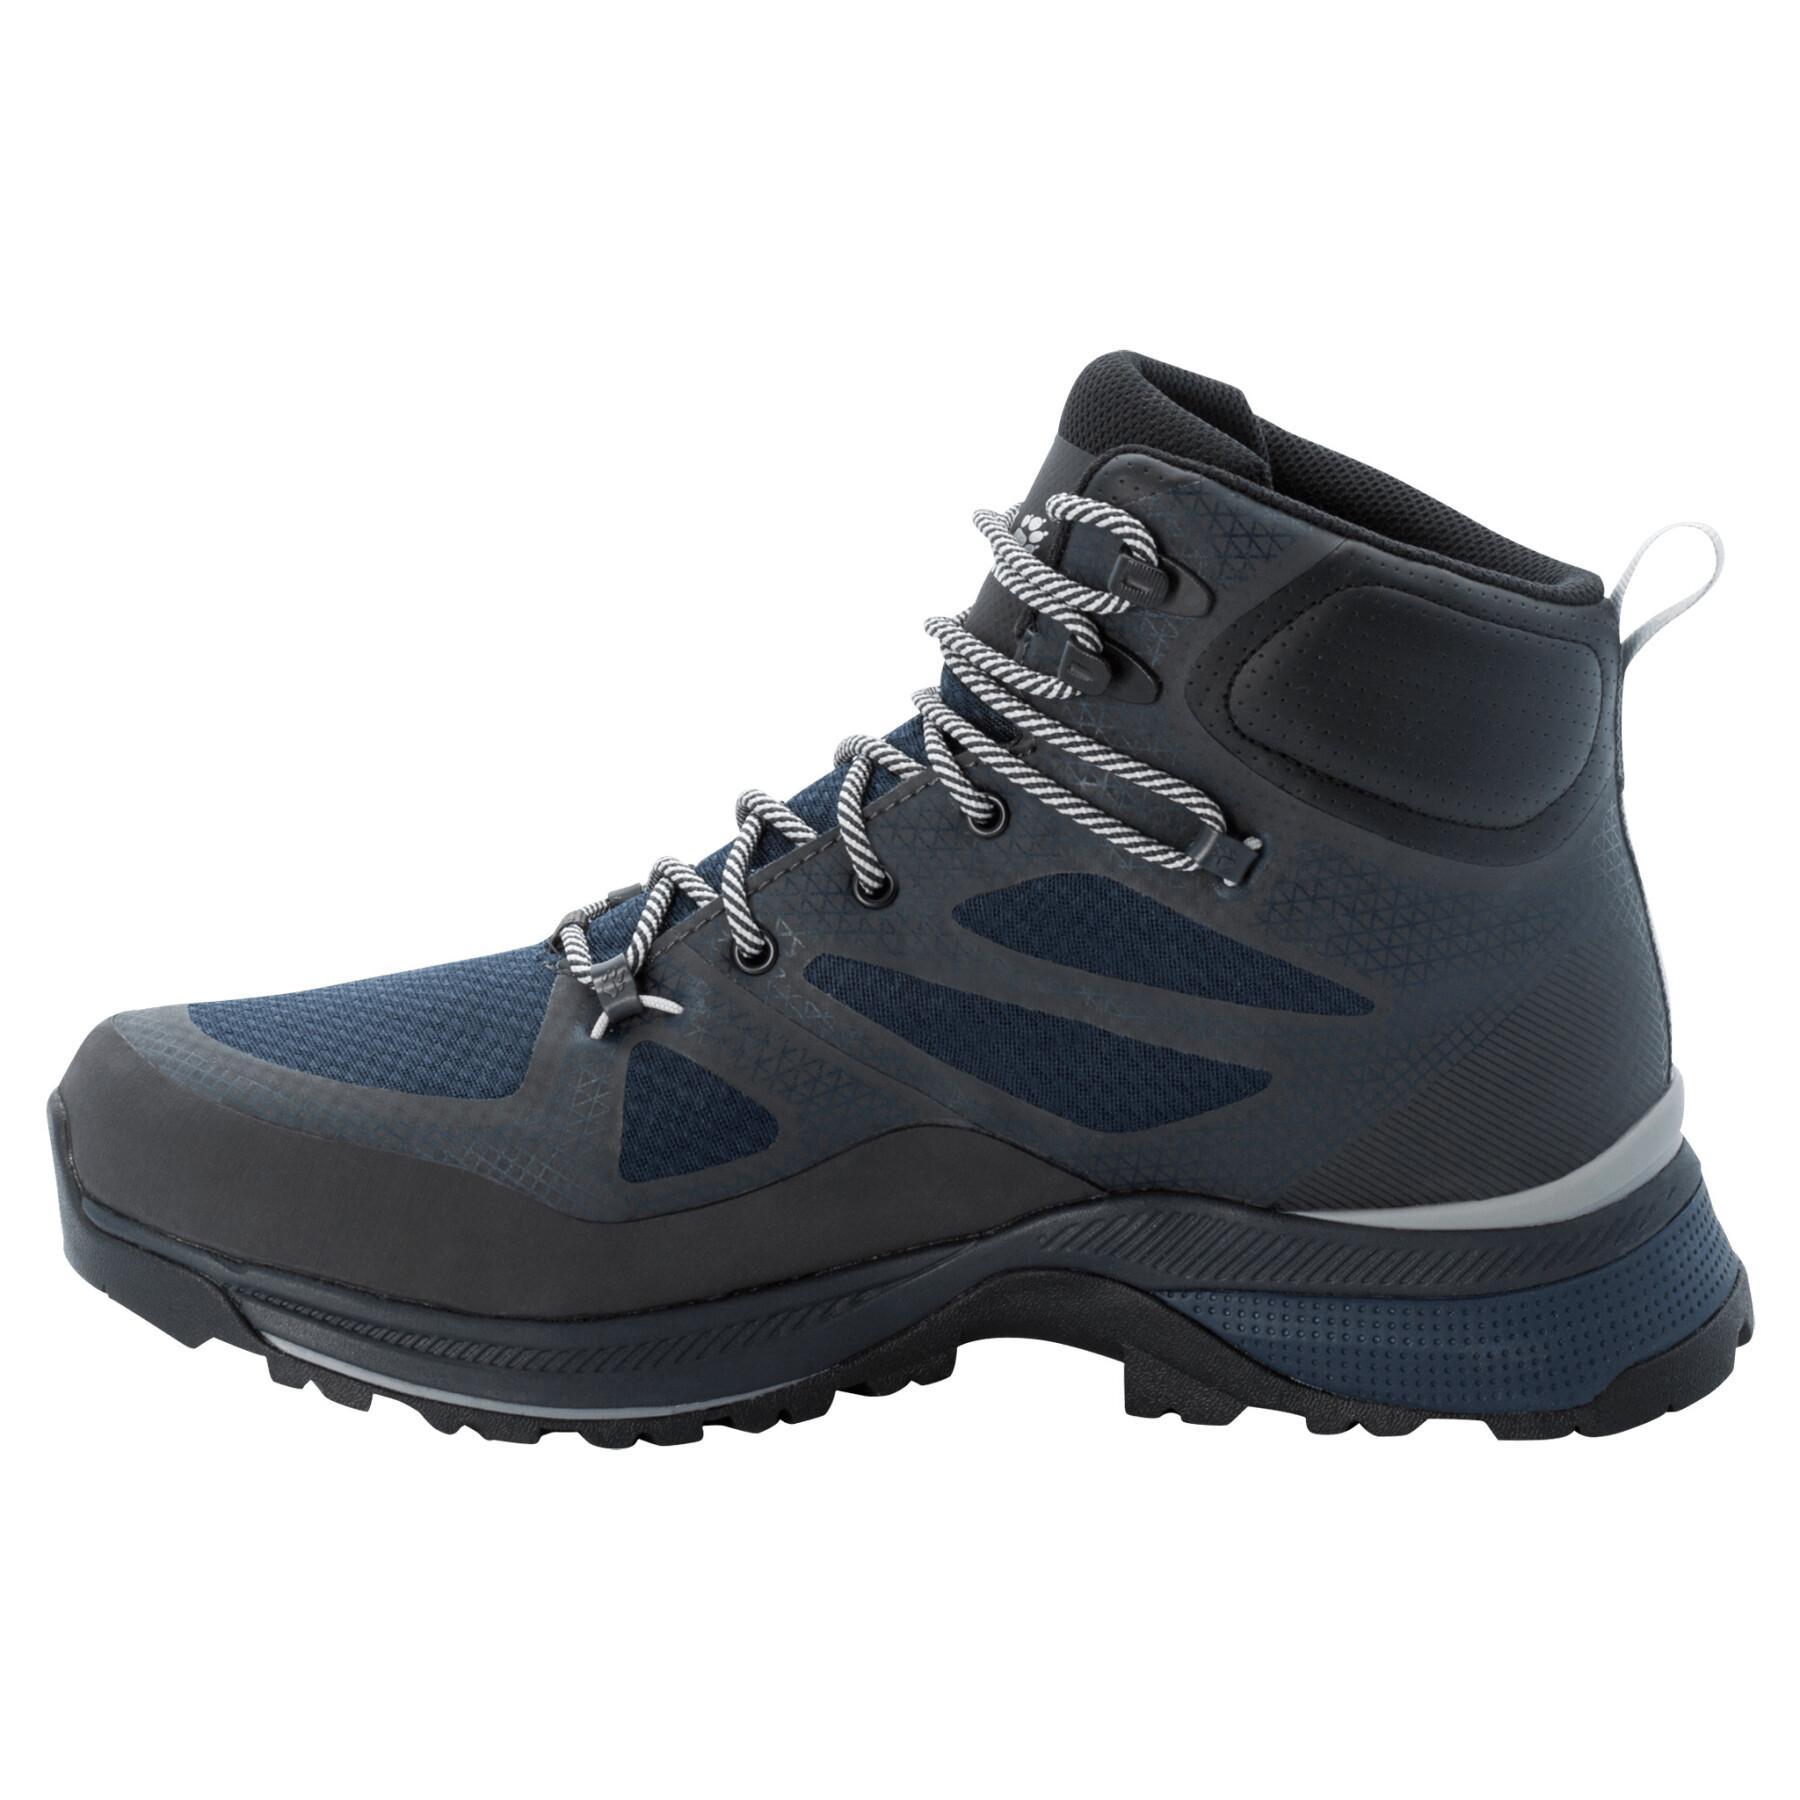 Hiking shoes Jack Wolfskin Force Striker Texapore Mid GT